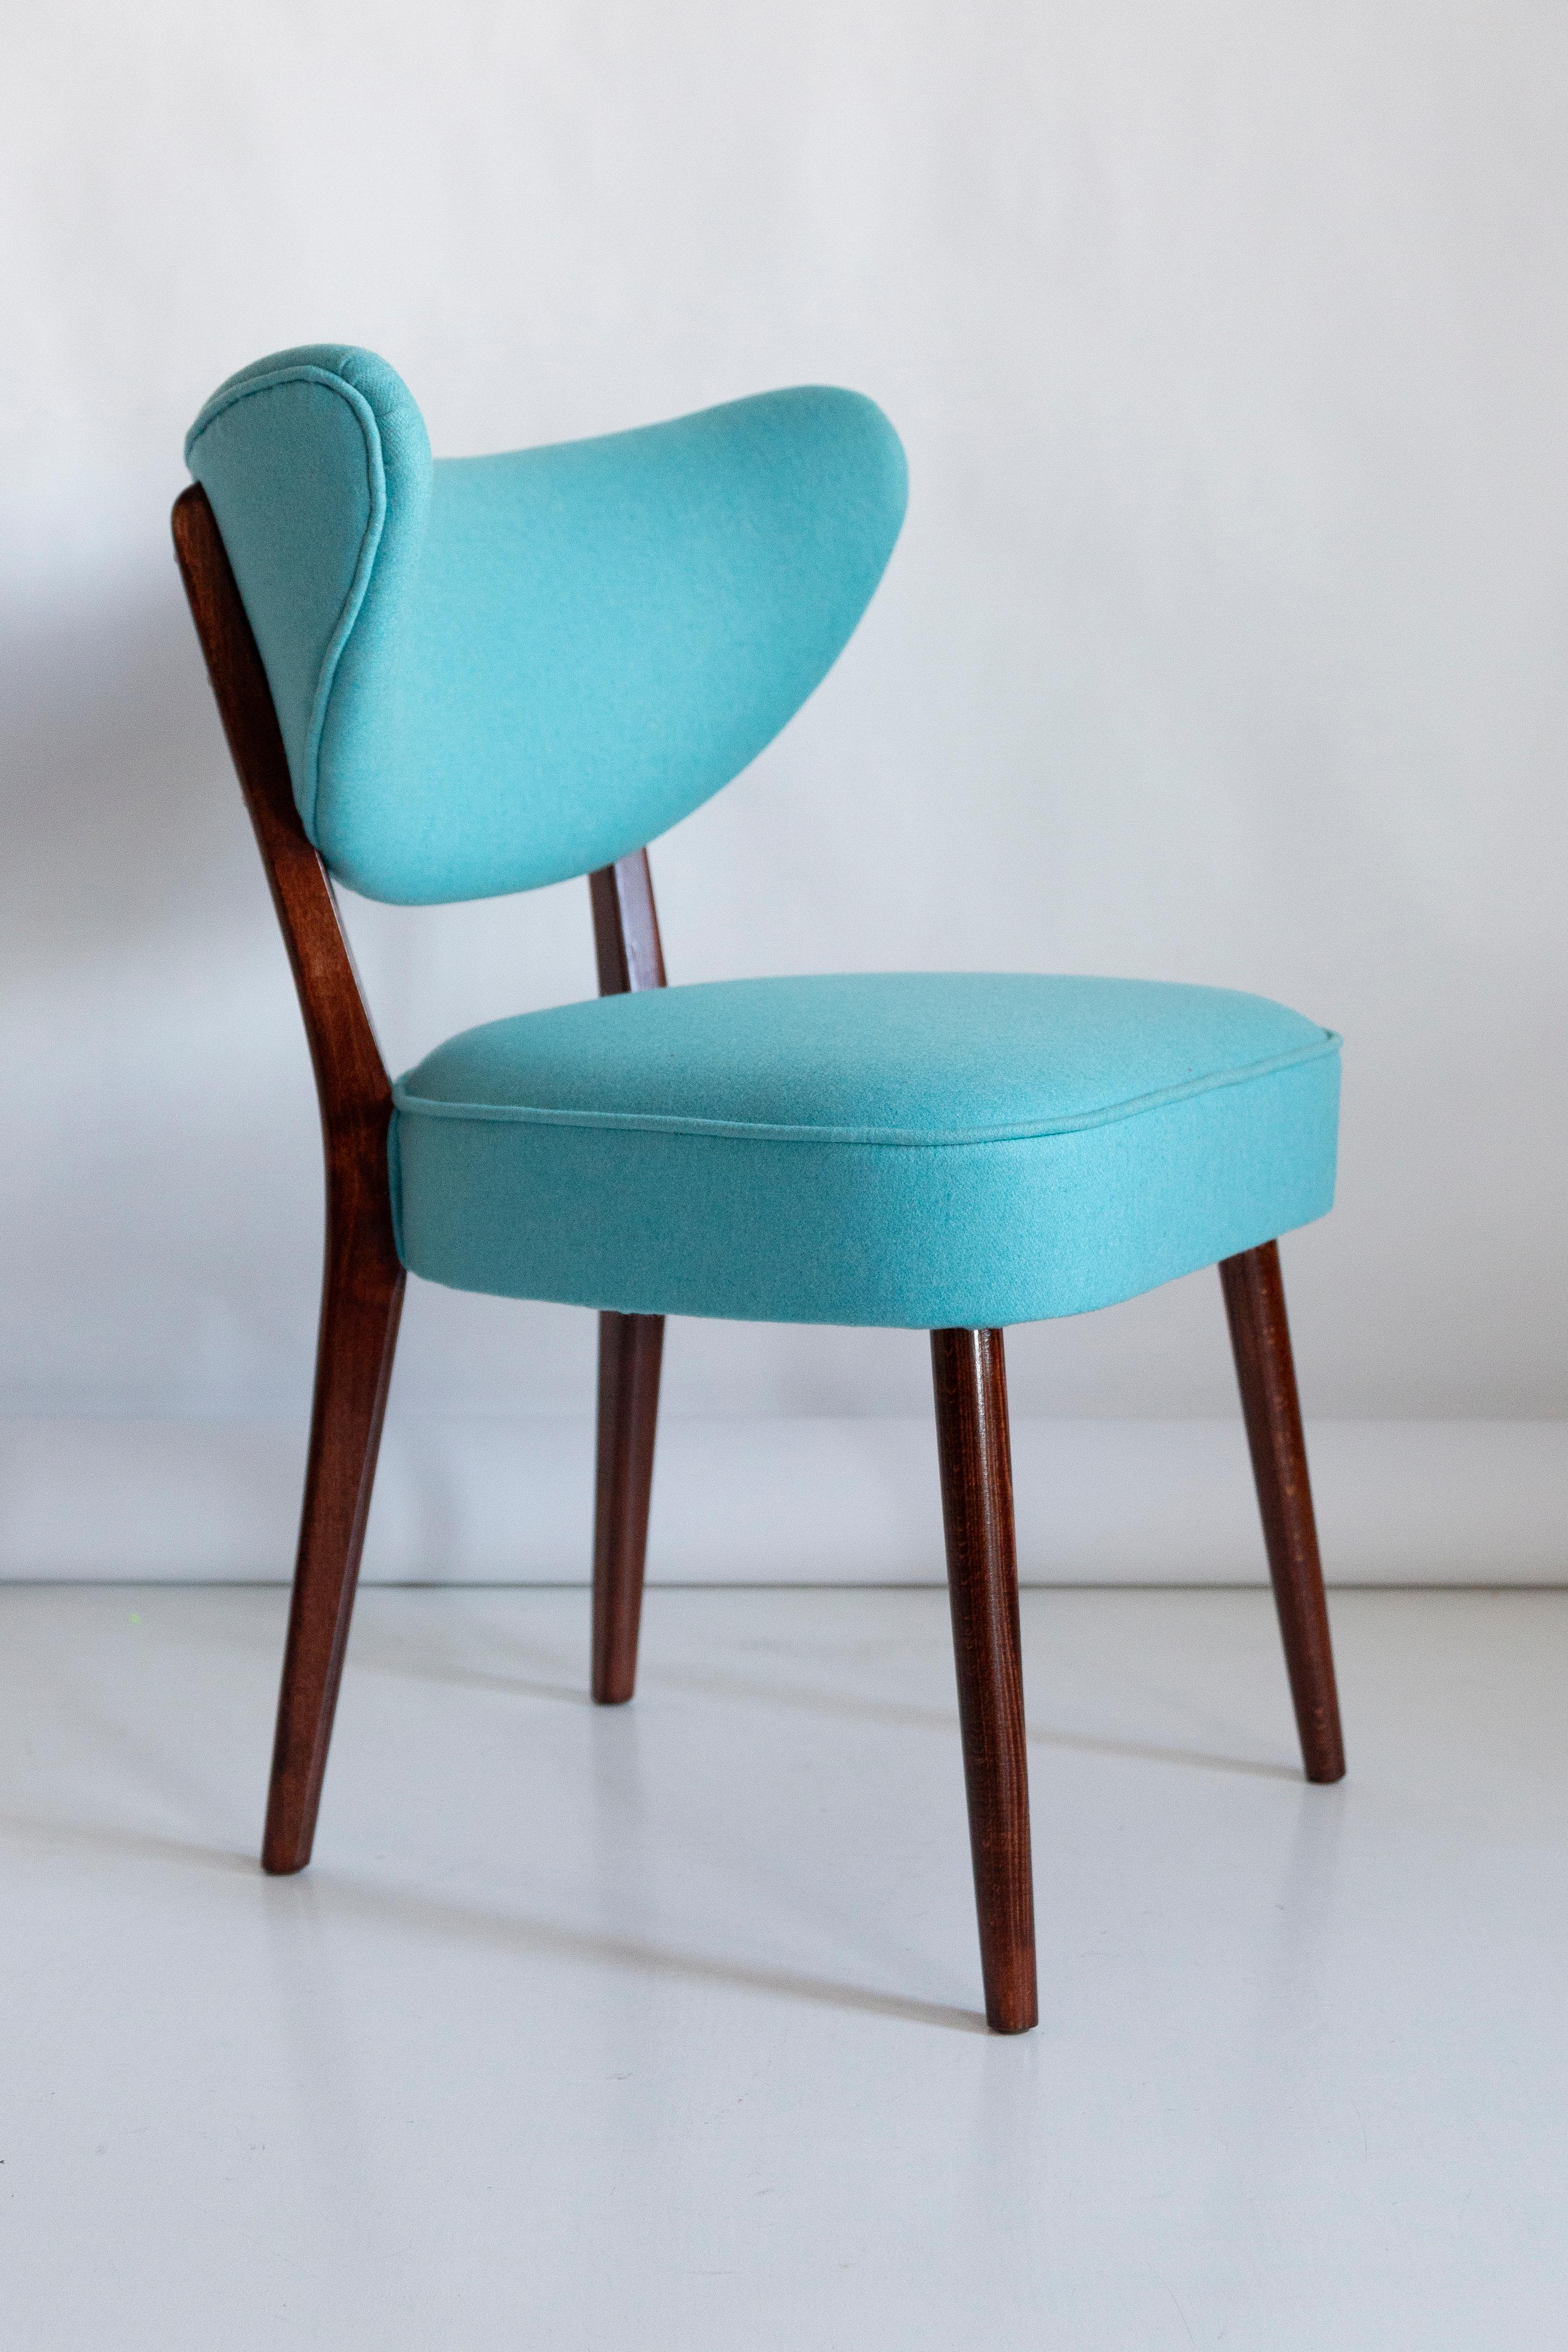 Shell Dining Chair, Turquoise Wool, by Vintola Studio, Europe, Poland In New Condition For Sale In 05-080 Hornowek, PL